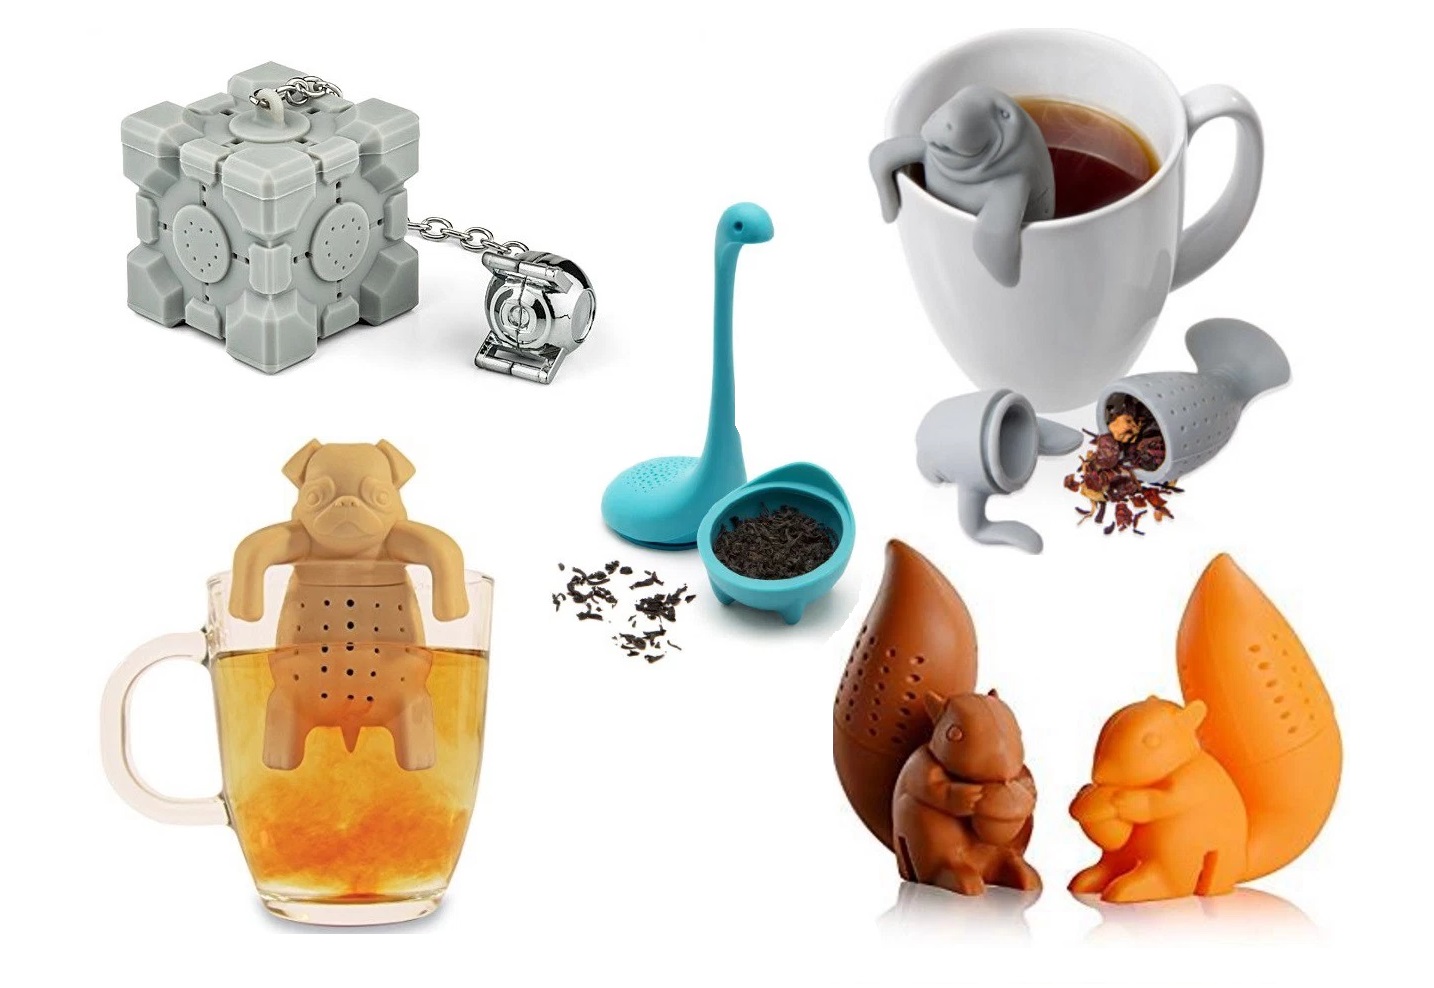 Top 10 Amazing, Nerdy and Unusual Loose-Leaf Tea Infusers